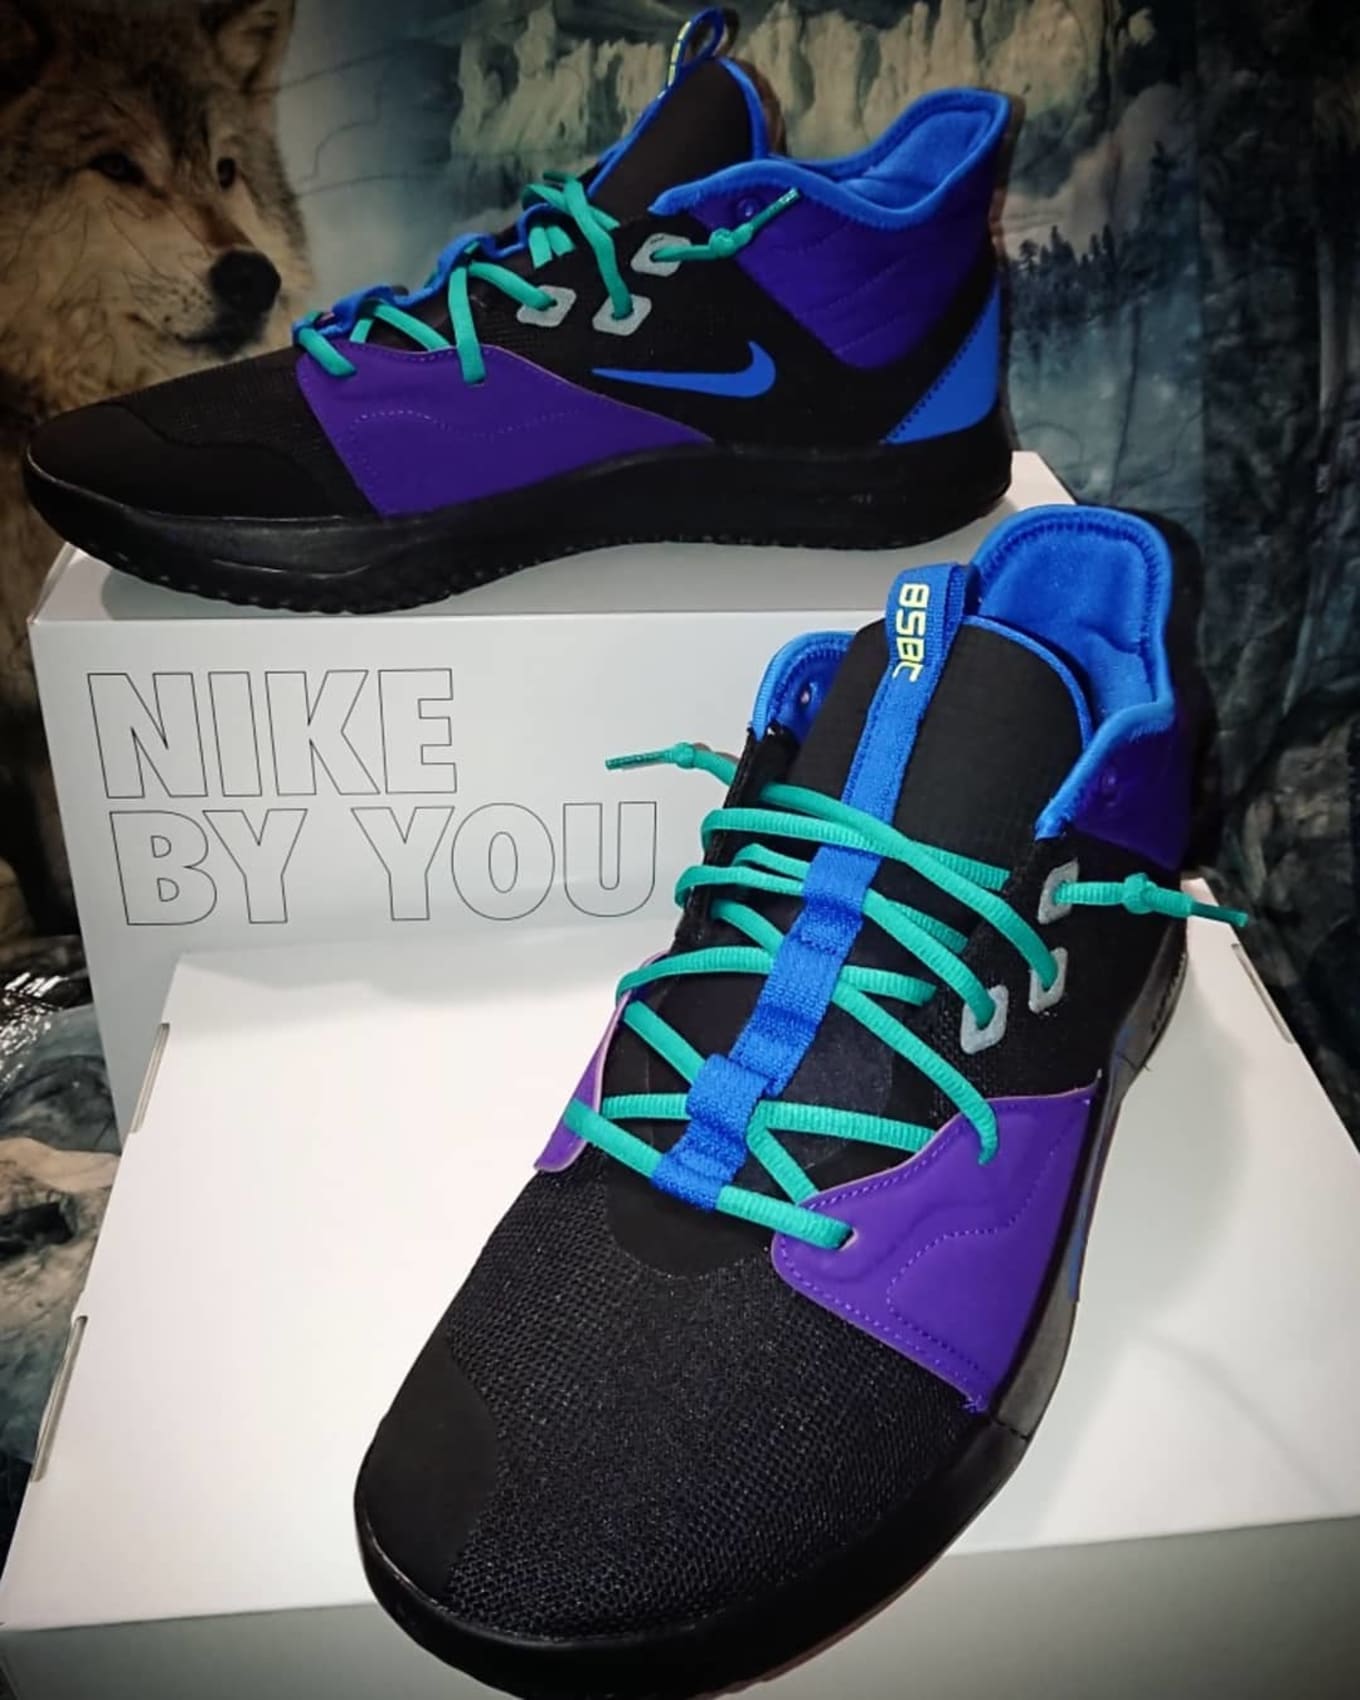 nike by you pg 3